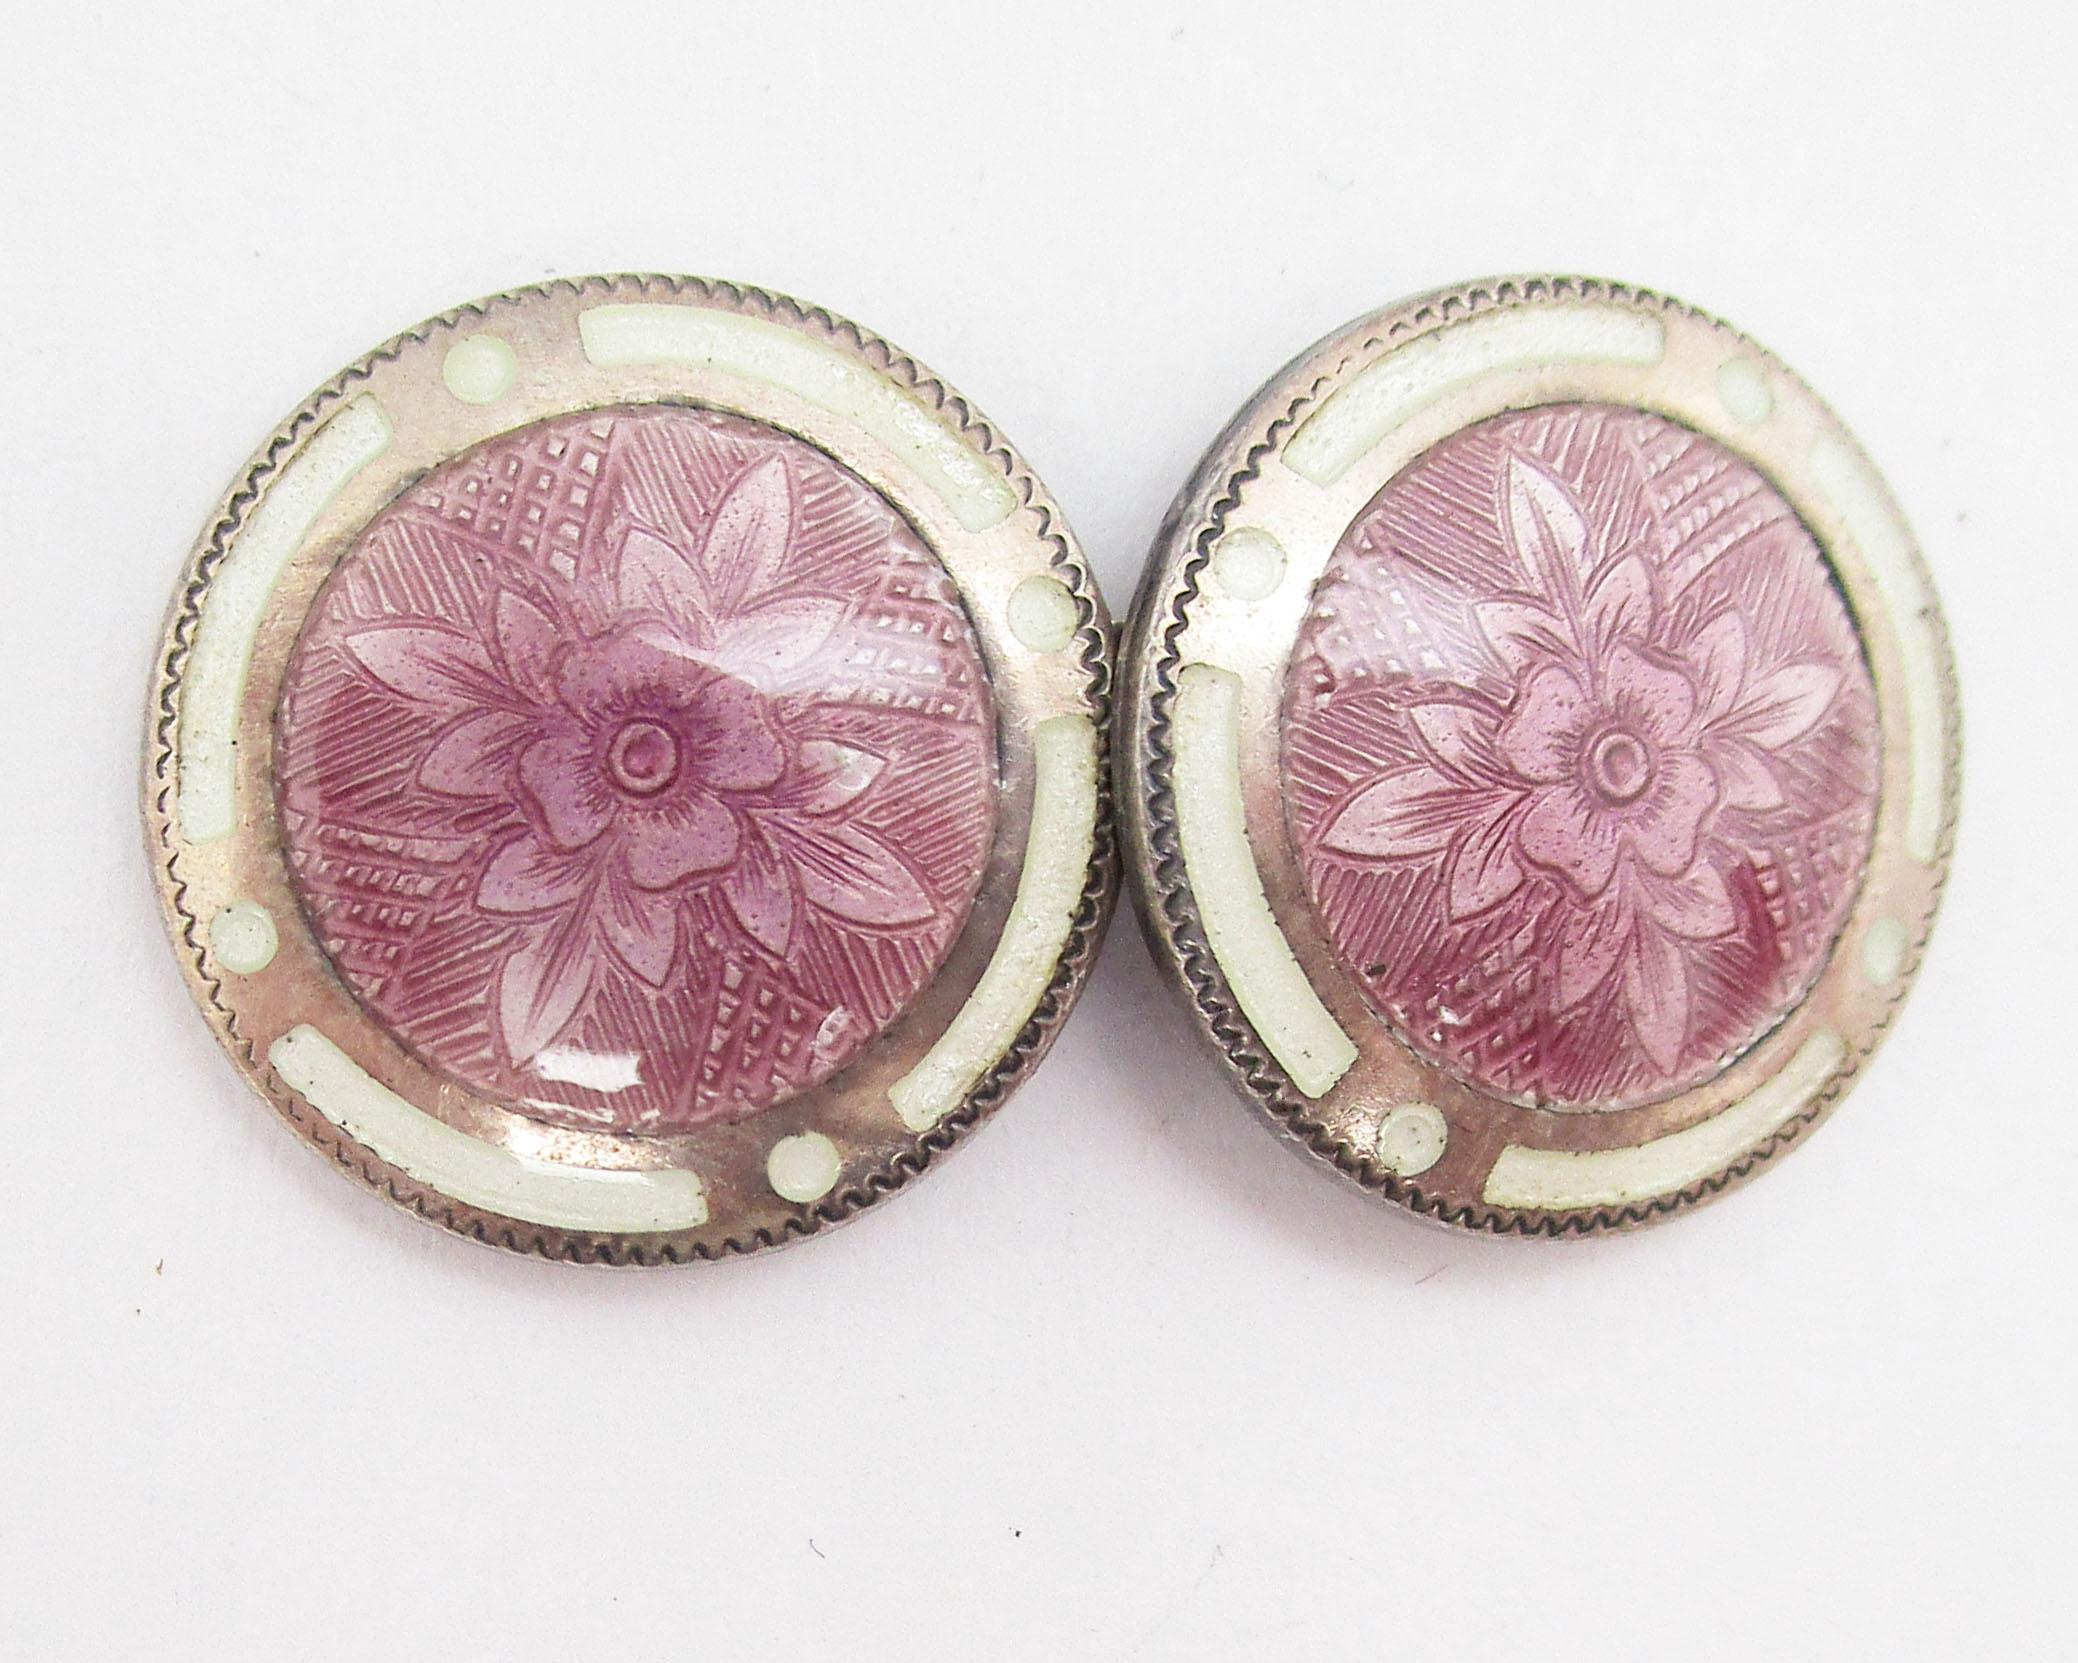 These magnificent sterling silver cufflinks feature a soft shade of lavender and an intricate floral design framed by a creamy white border. These links are in amazing shape. The enamel features killer colors that you’ll be hard pressed to find! The